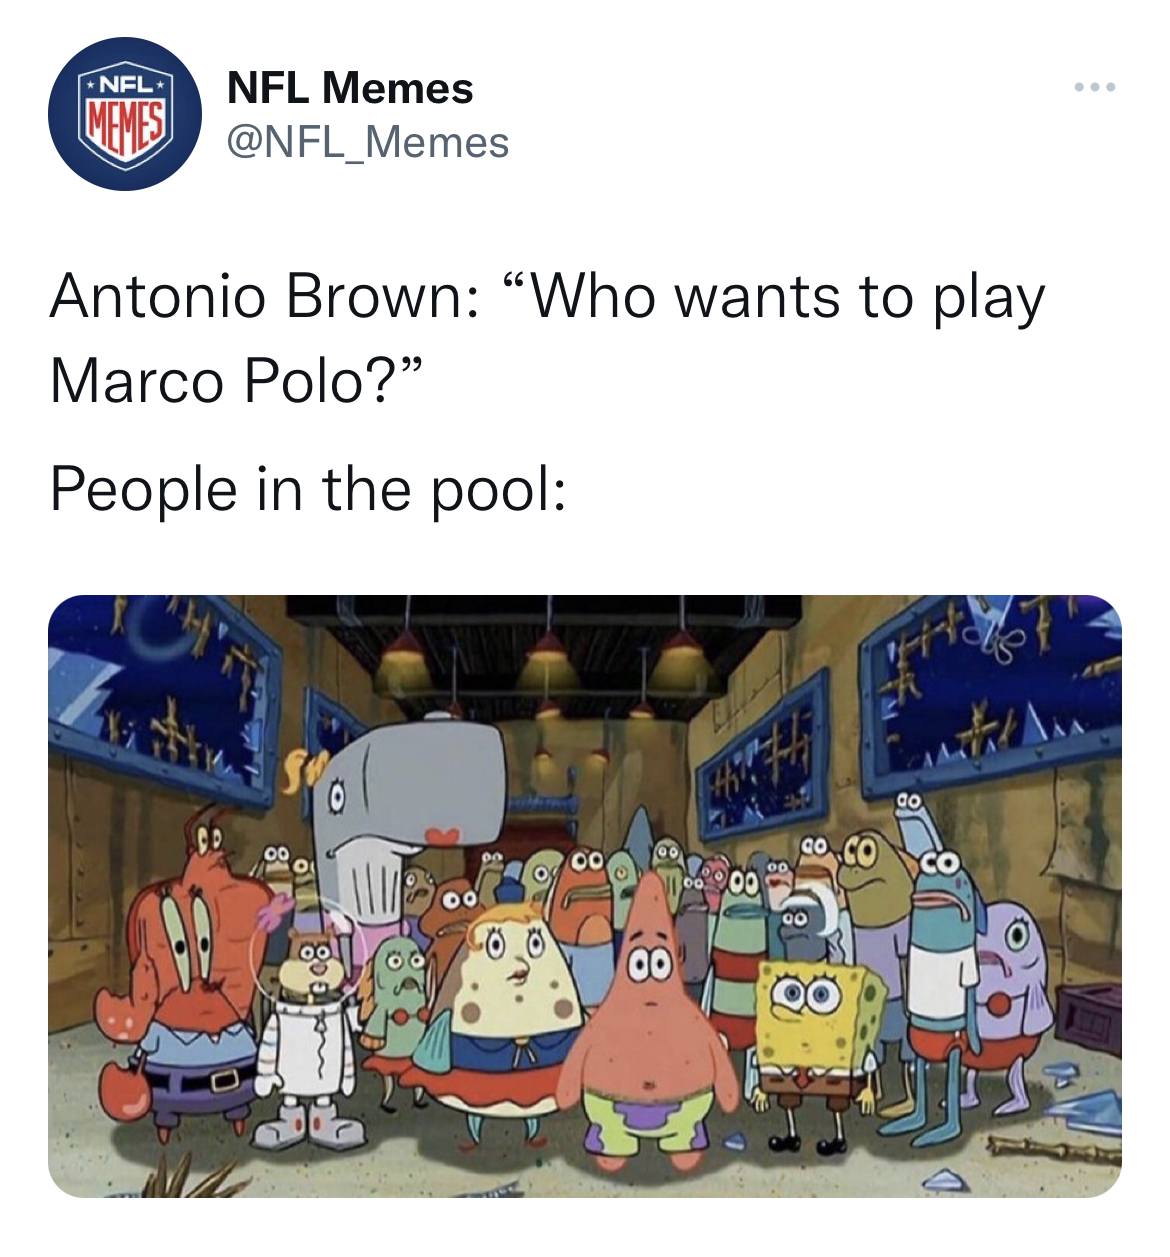 nfl memes - spongebob band geeks - Nfl Memes Nfl Memes Antonio Brown "Who wants to play Marco Polo?" People in the pool 10 O 00 \\ Co 00 Co Co 18